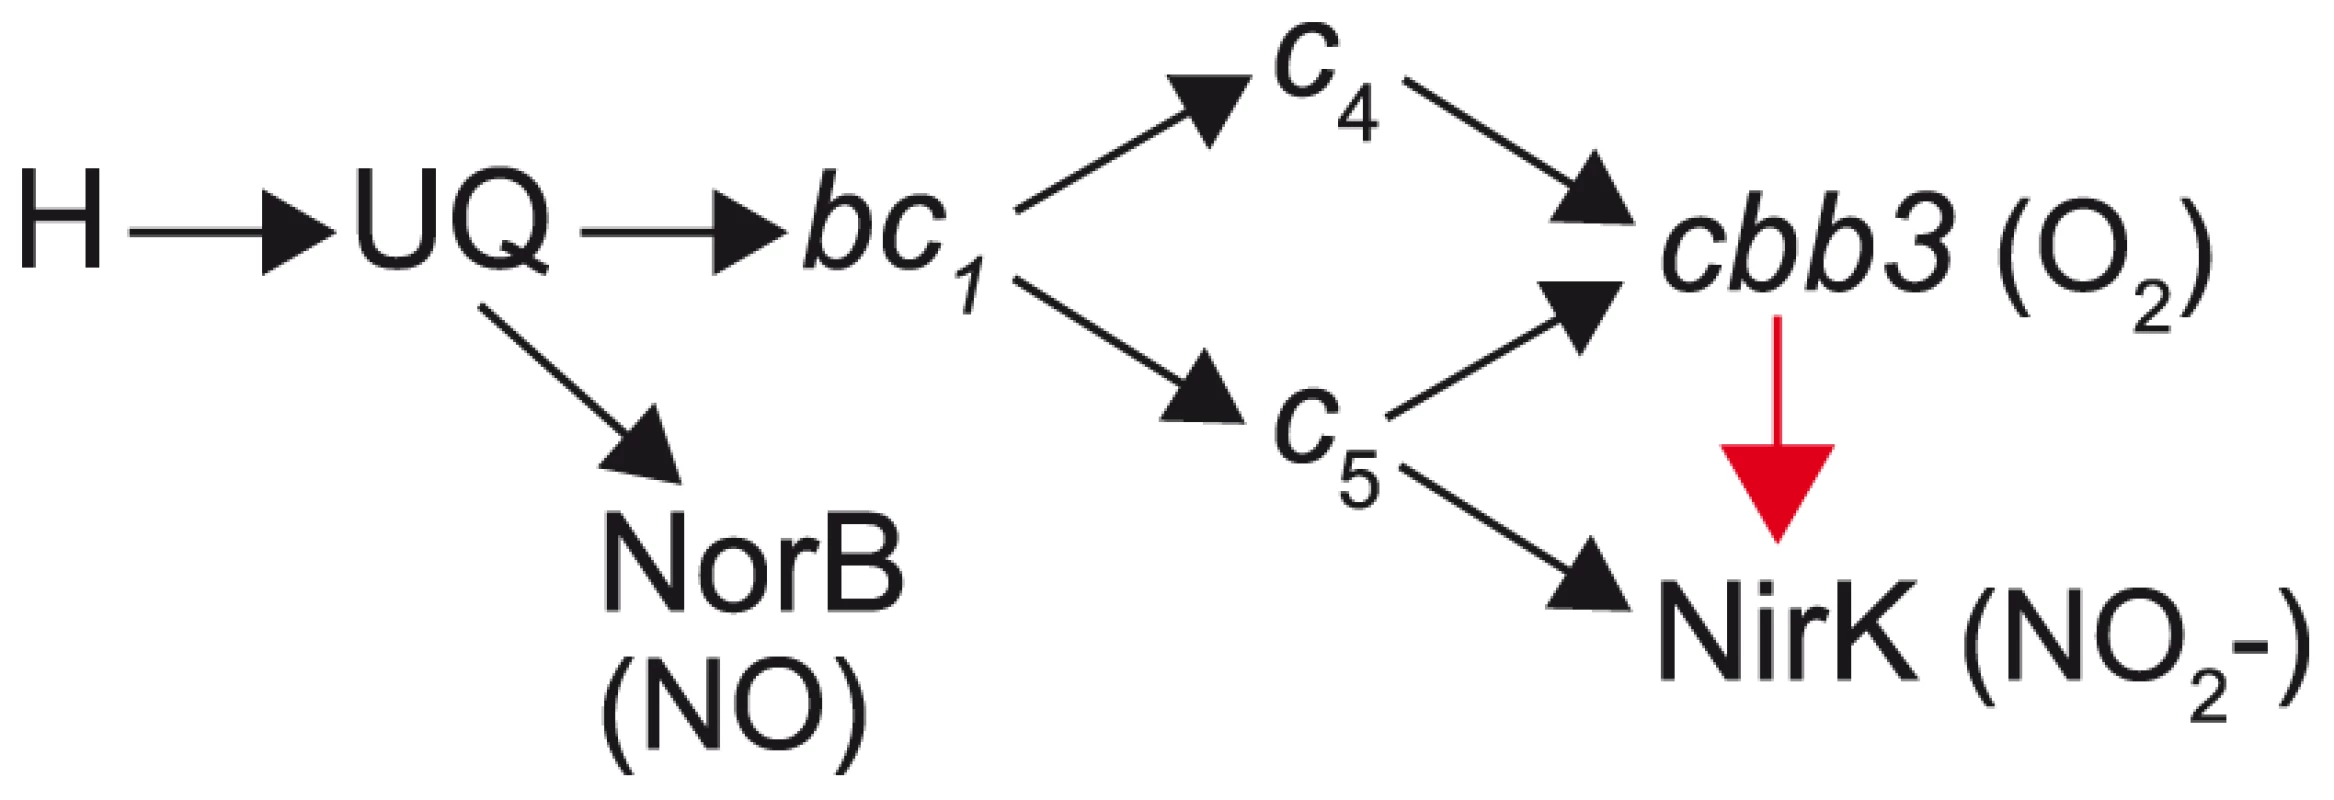 Proposed pathway for electron transfer from NADH to nitric oxide, oxygen and nitrite in <i>N. meningitidis</i> and <i>N. gonorrhoeae</i>.